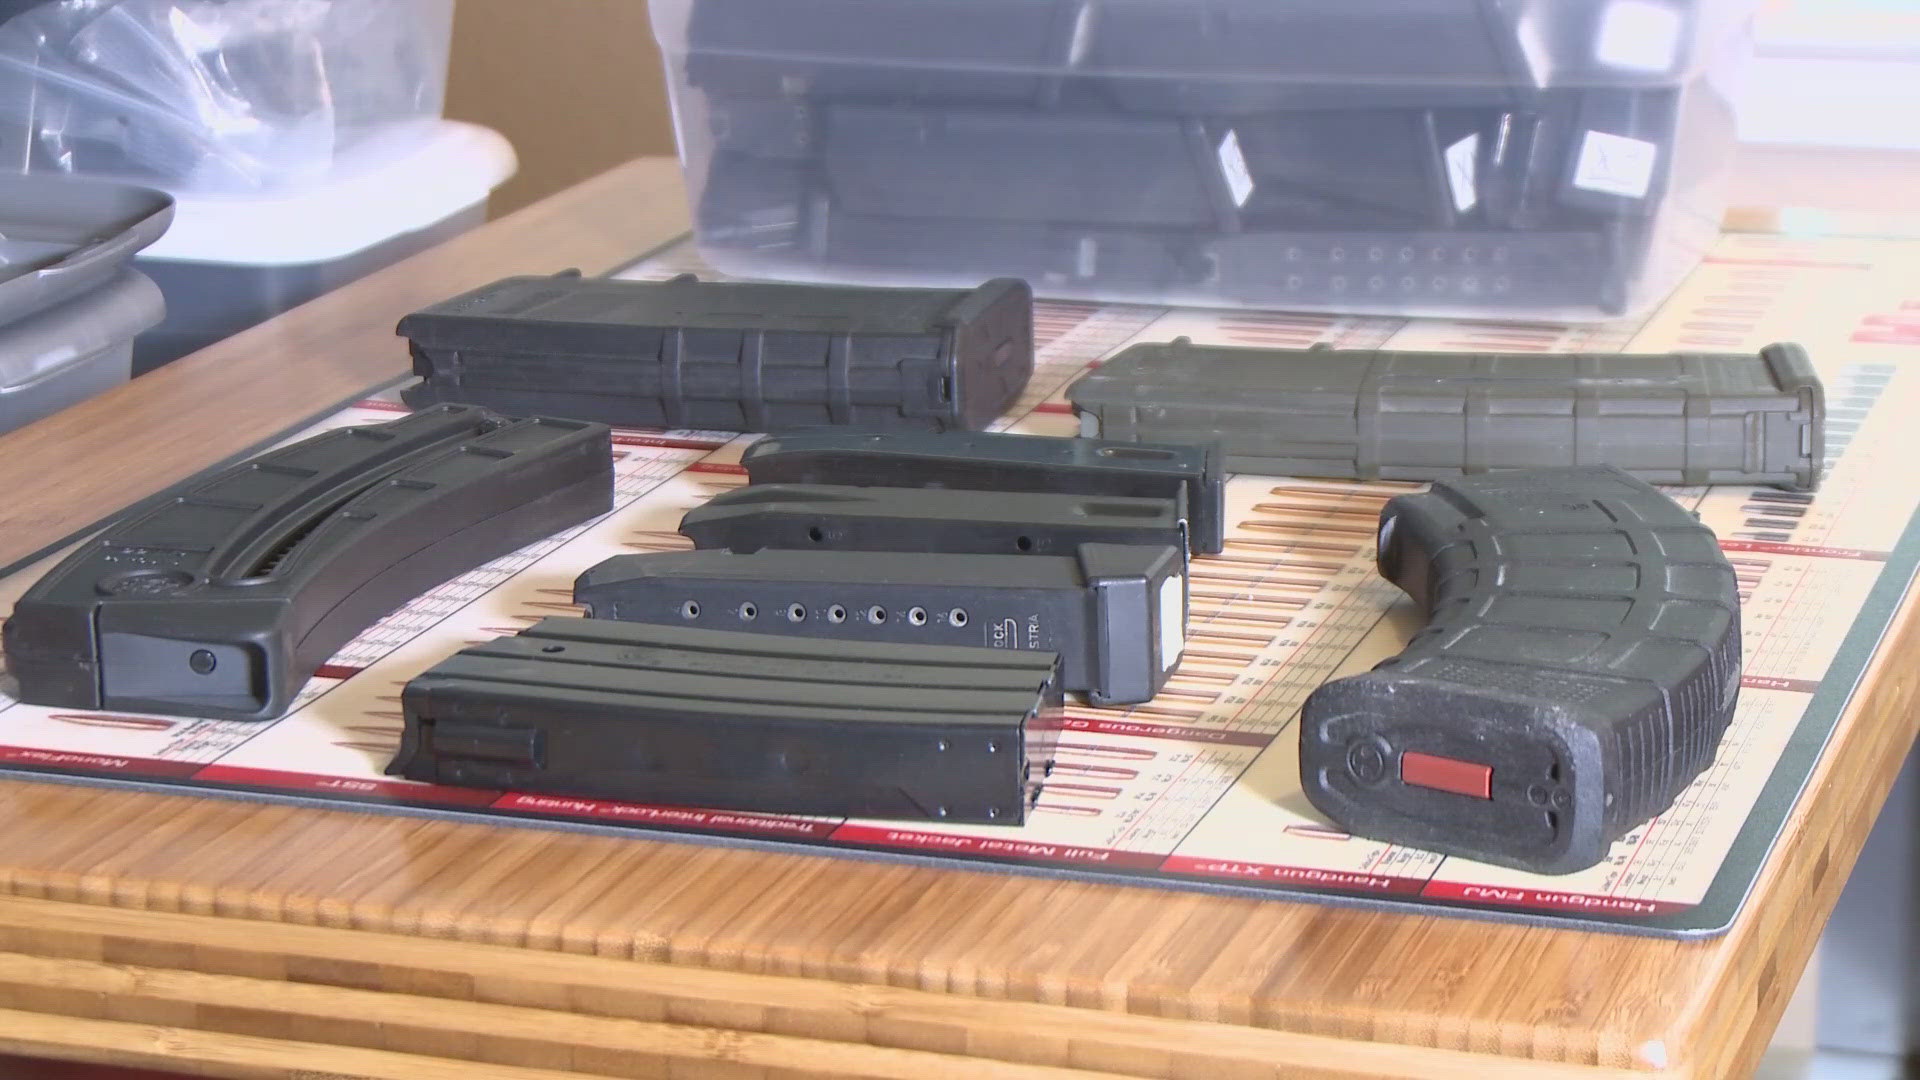 A Cowlitz County judge ruled the ban on the sale of high capacity magazines in Washington unconstitutional.